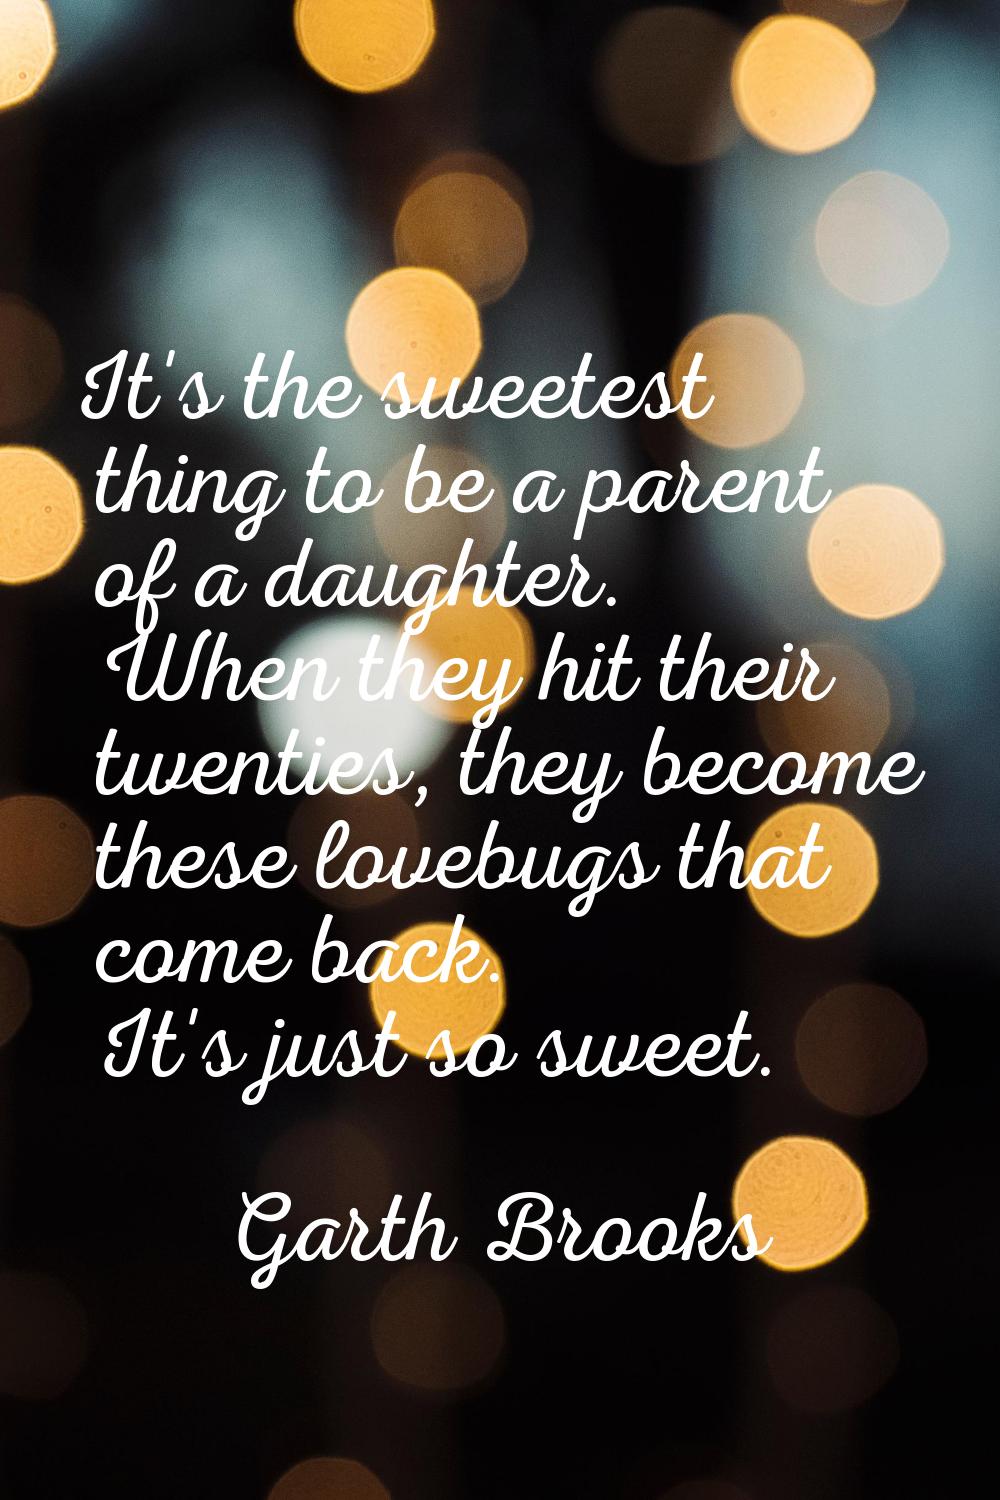 It's the sweetest thing to be a parent of a daughter. When they hit their twenties, they become the